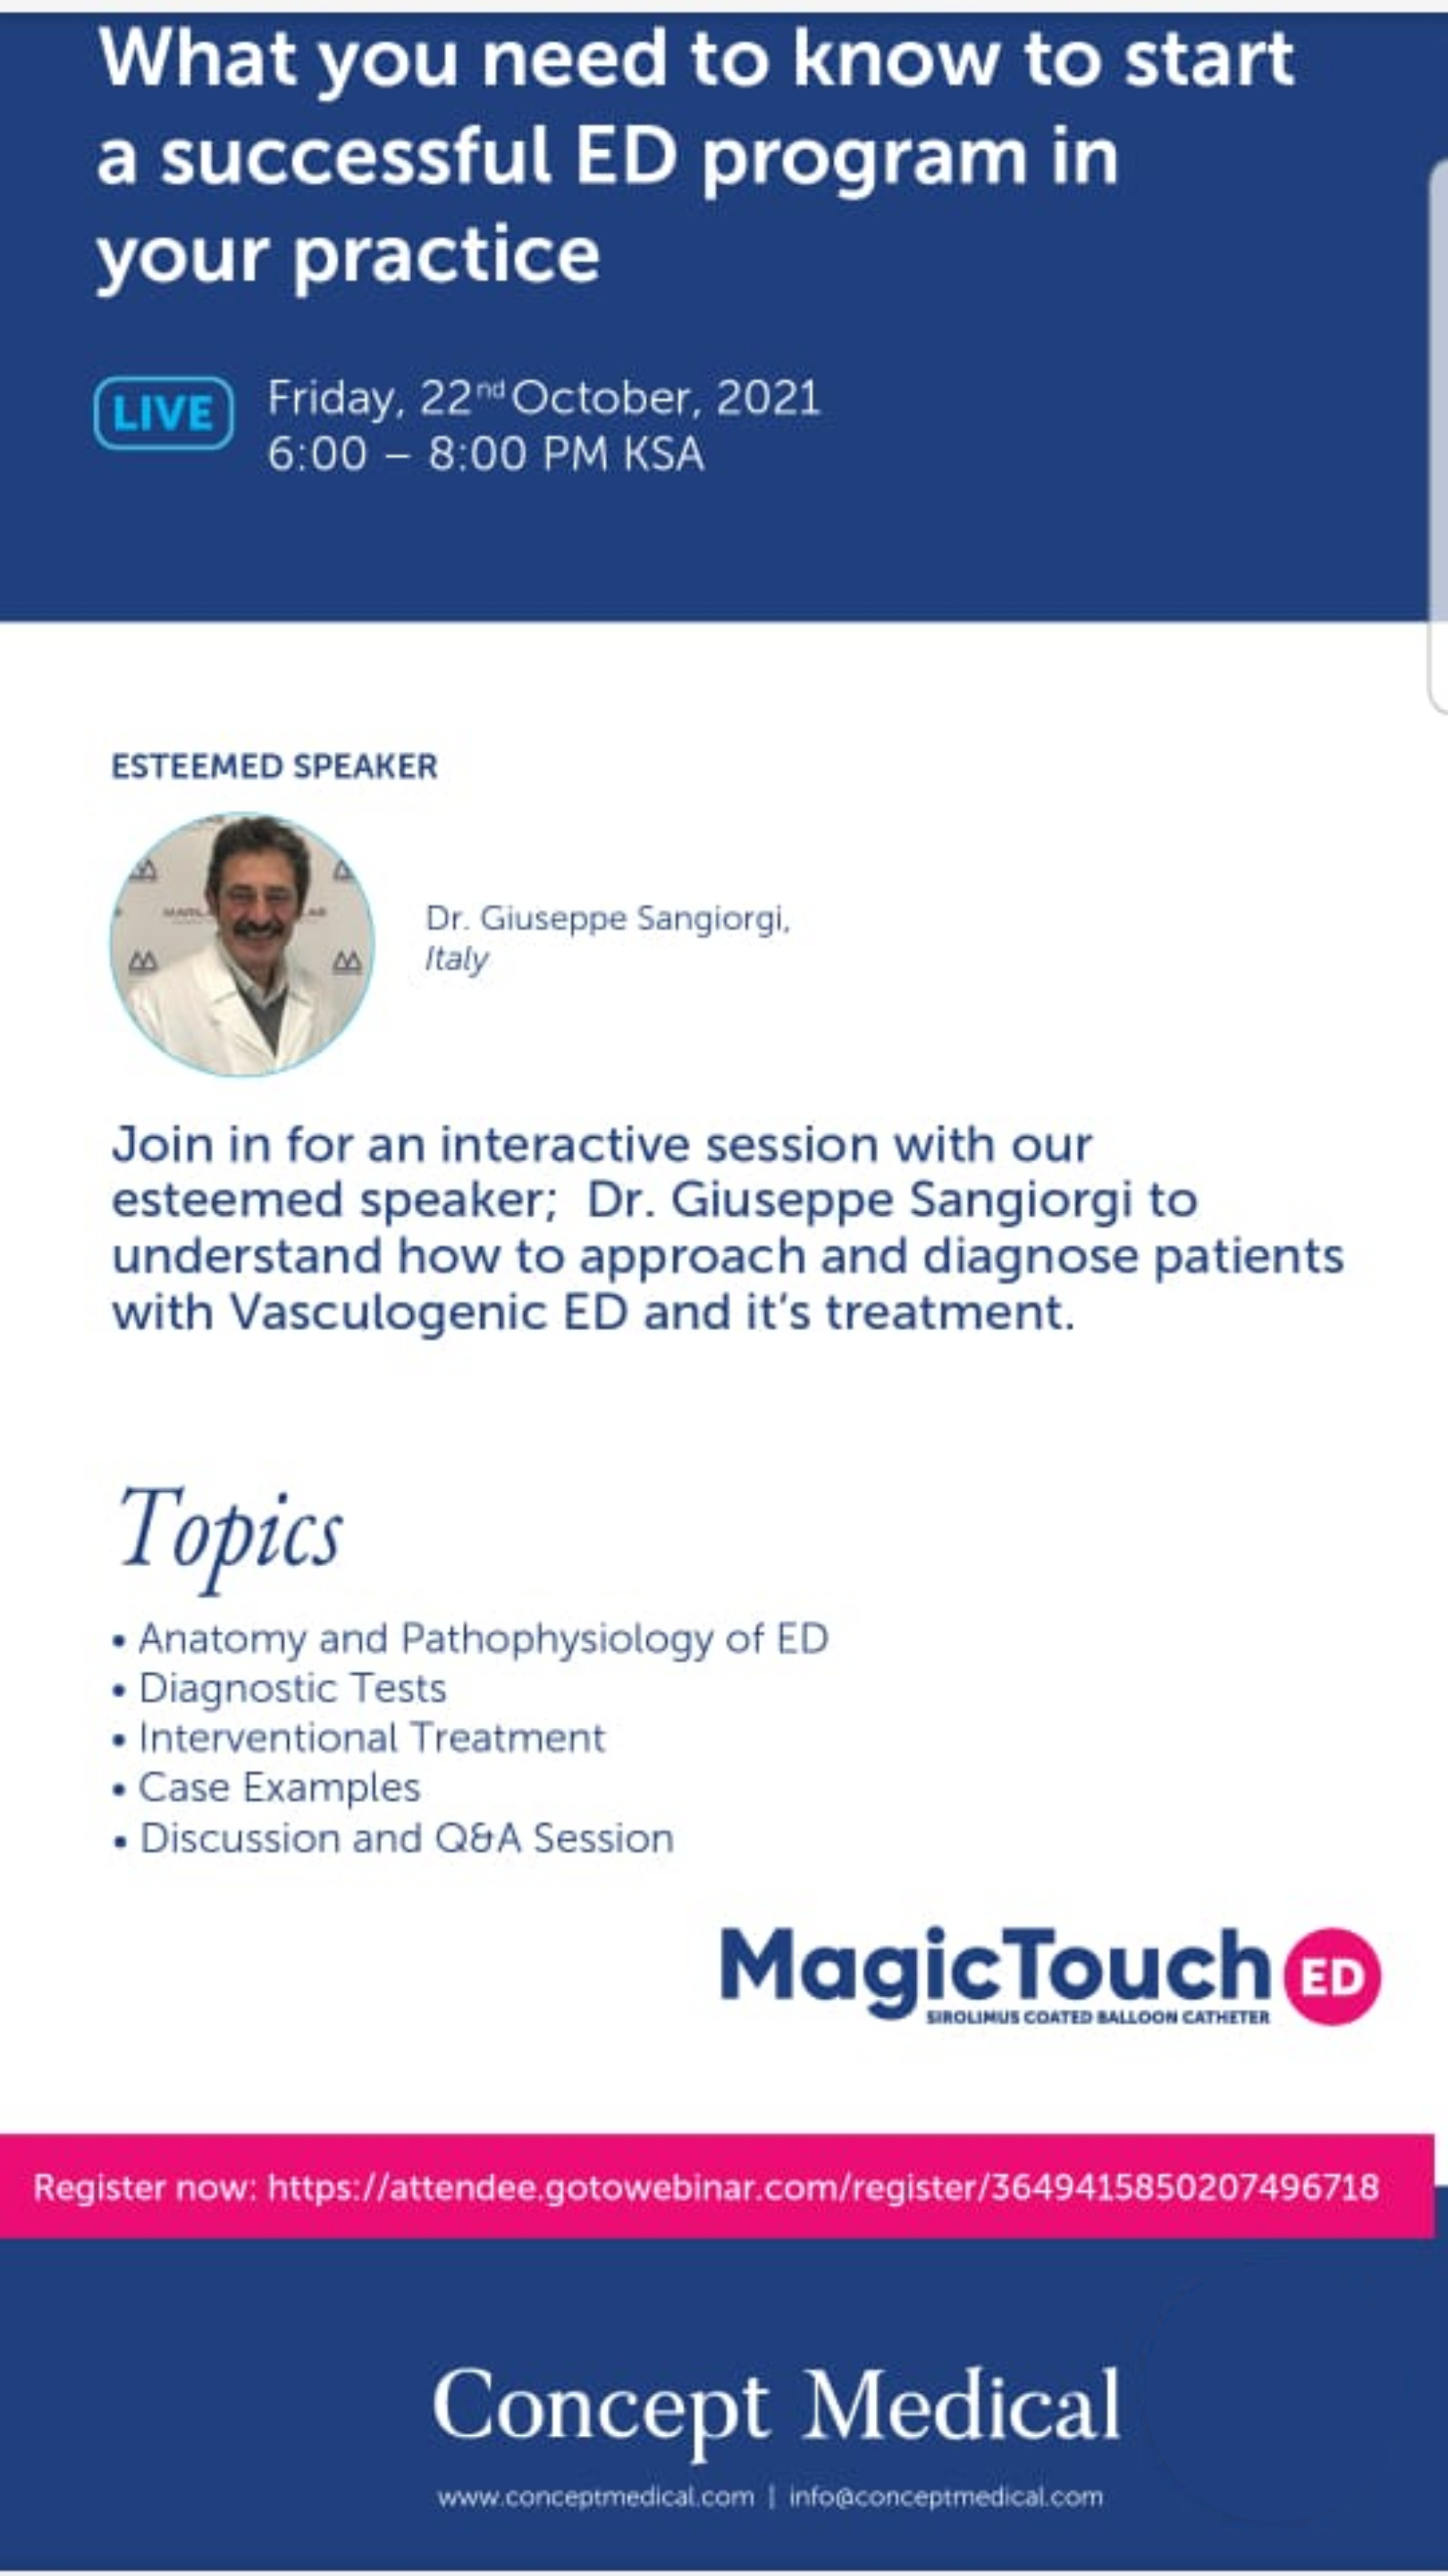 Training about MagicTouch ED by Prof. Sangiorg. Live session Friday 22nd October (6:00-8.00, KSA time zone) & (5.00:7:00 Egypt time zone)